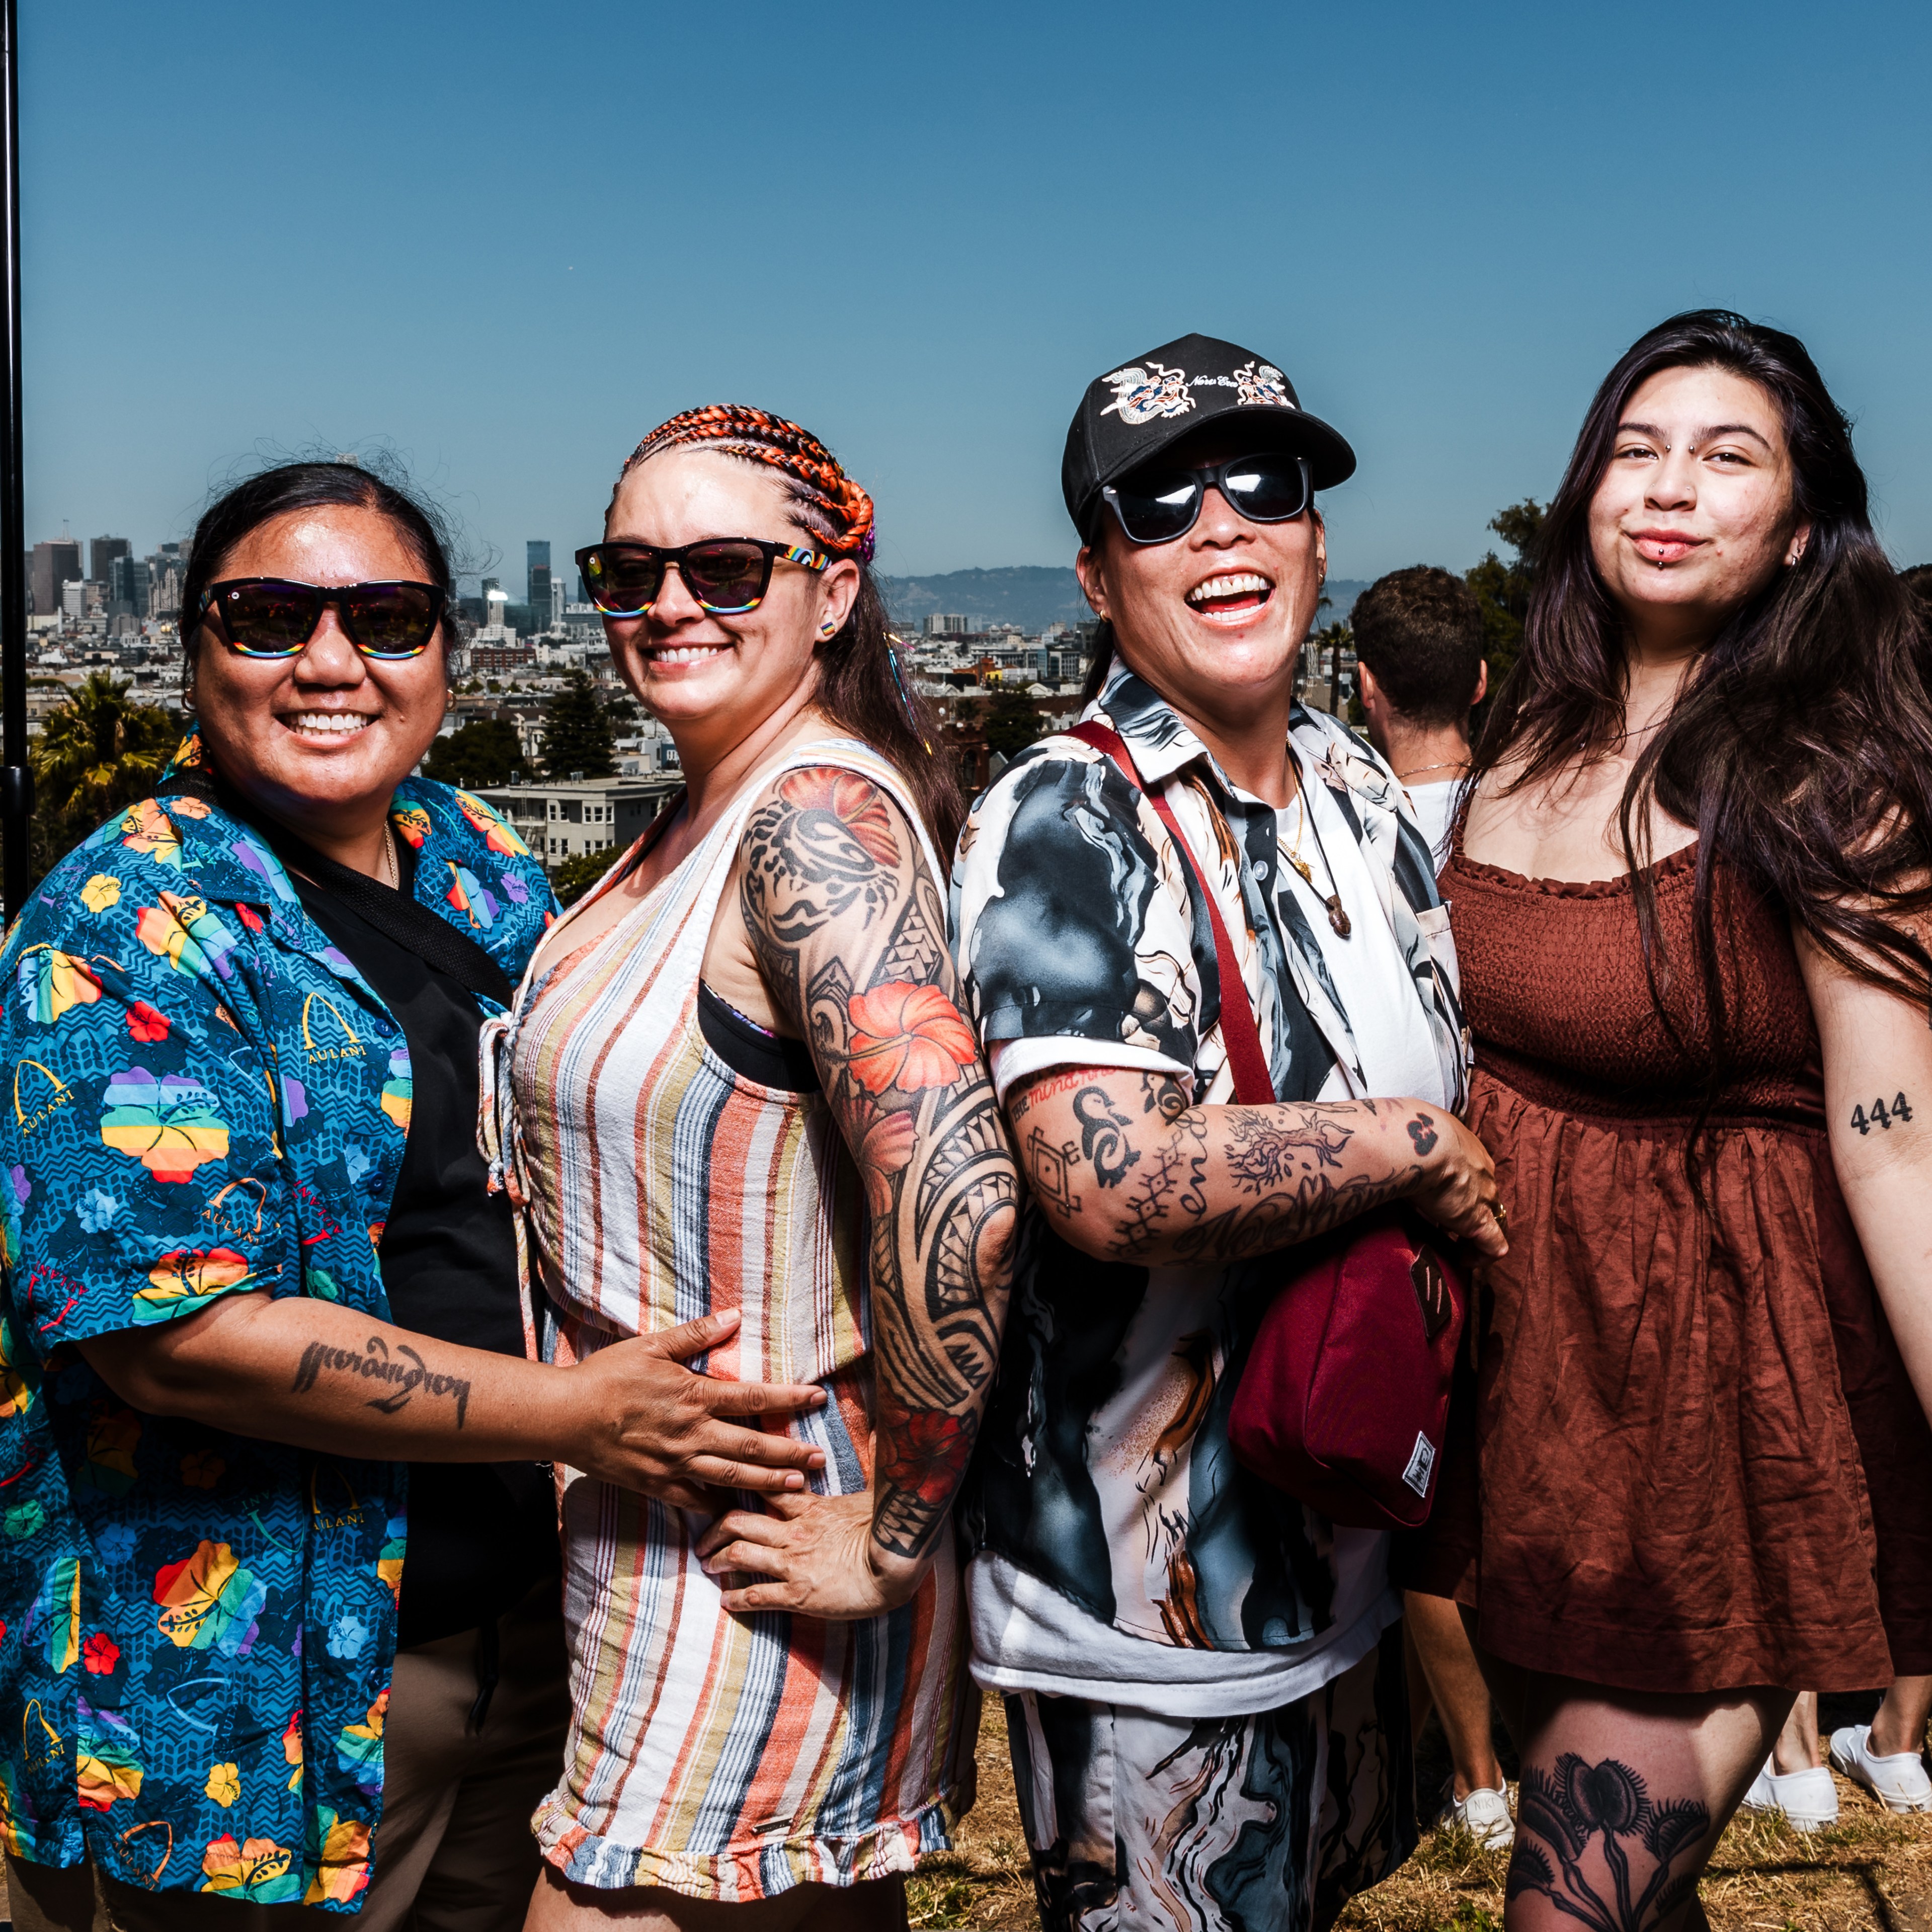 Four friends, all wearing sunglasses, stand close together smiling. They have diverse outfits and visible tattoos. A cityscape is in the background under a clear blue sky.